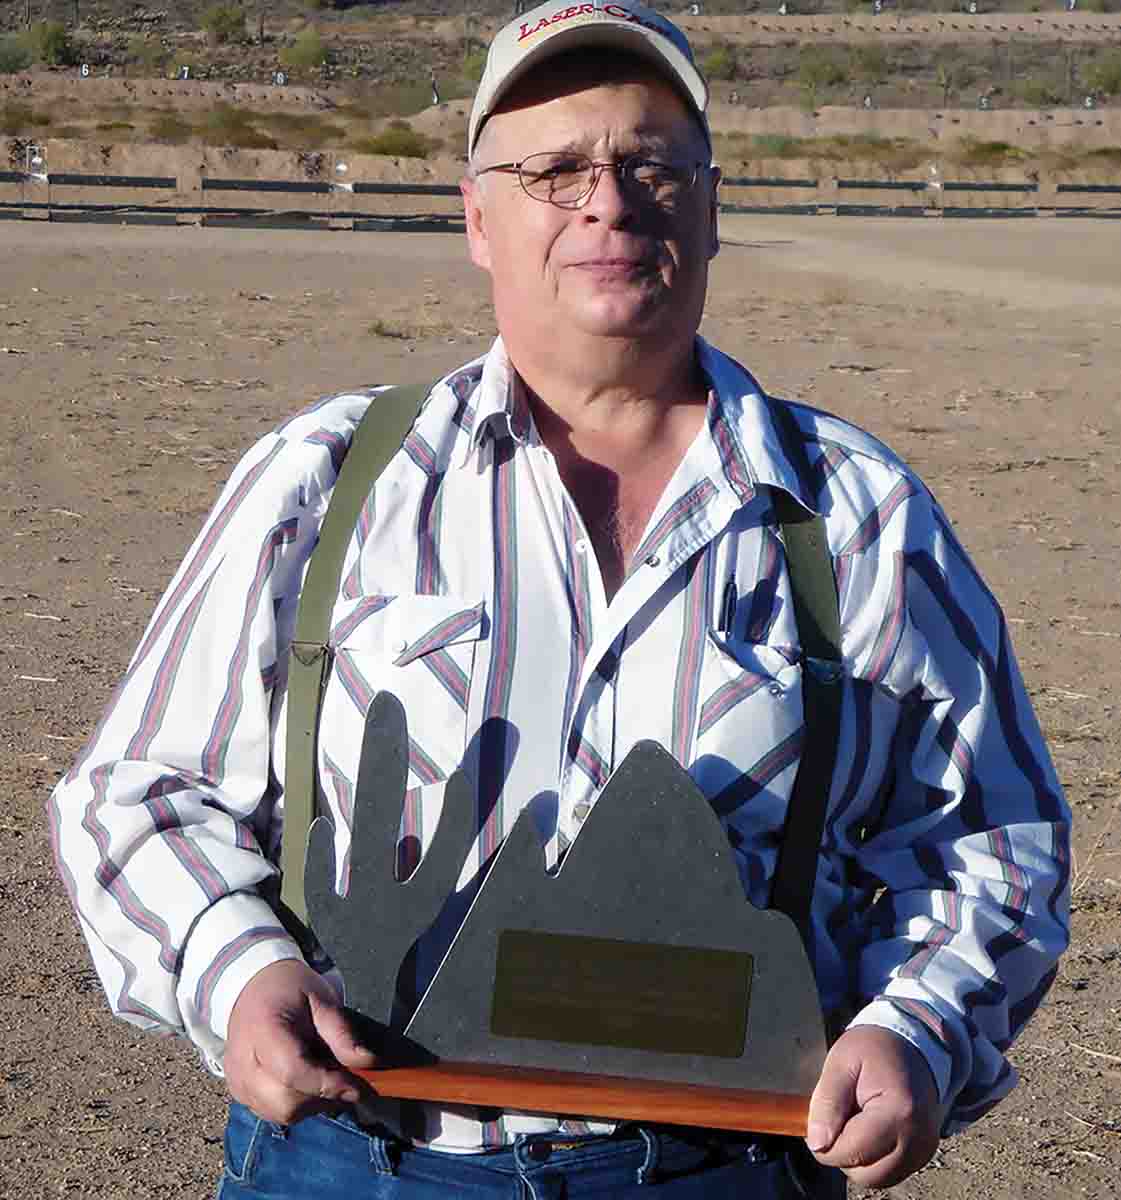 Mike said his “Match Winner” trophies are few, but this one was for the 2008 Arizona State BPCR Scoped Championship.